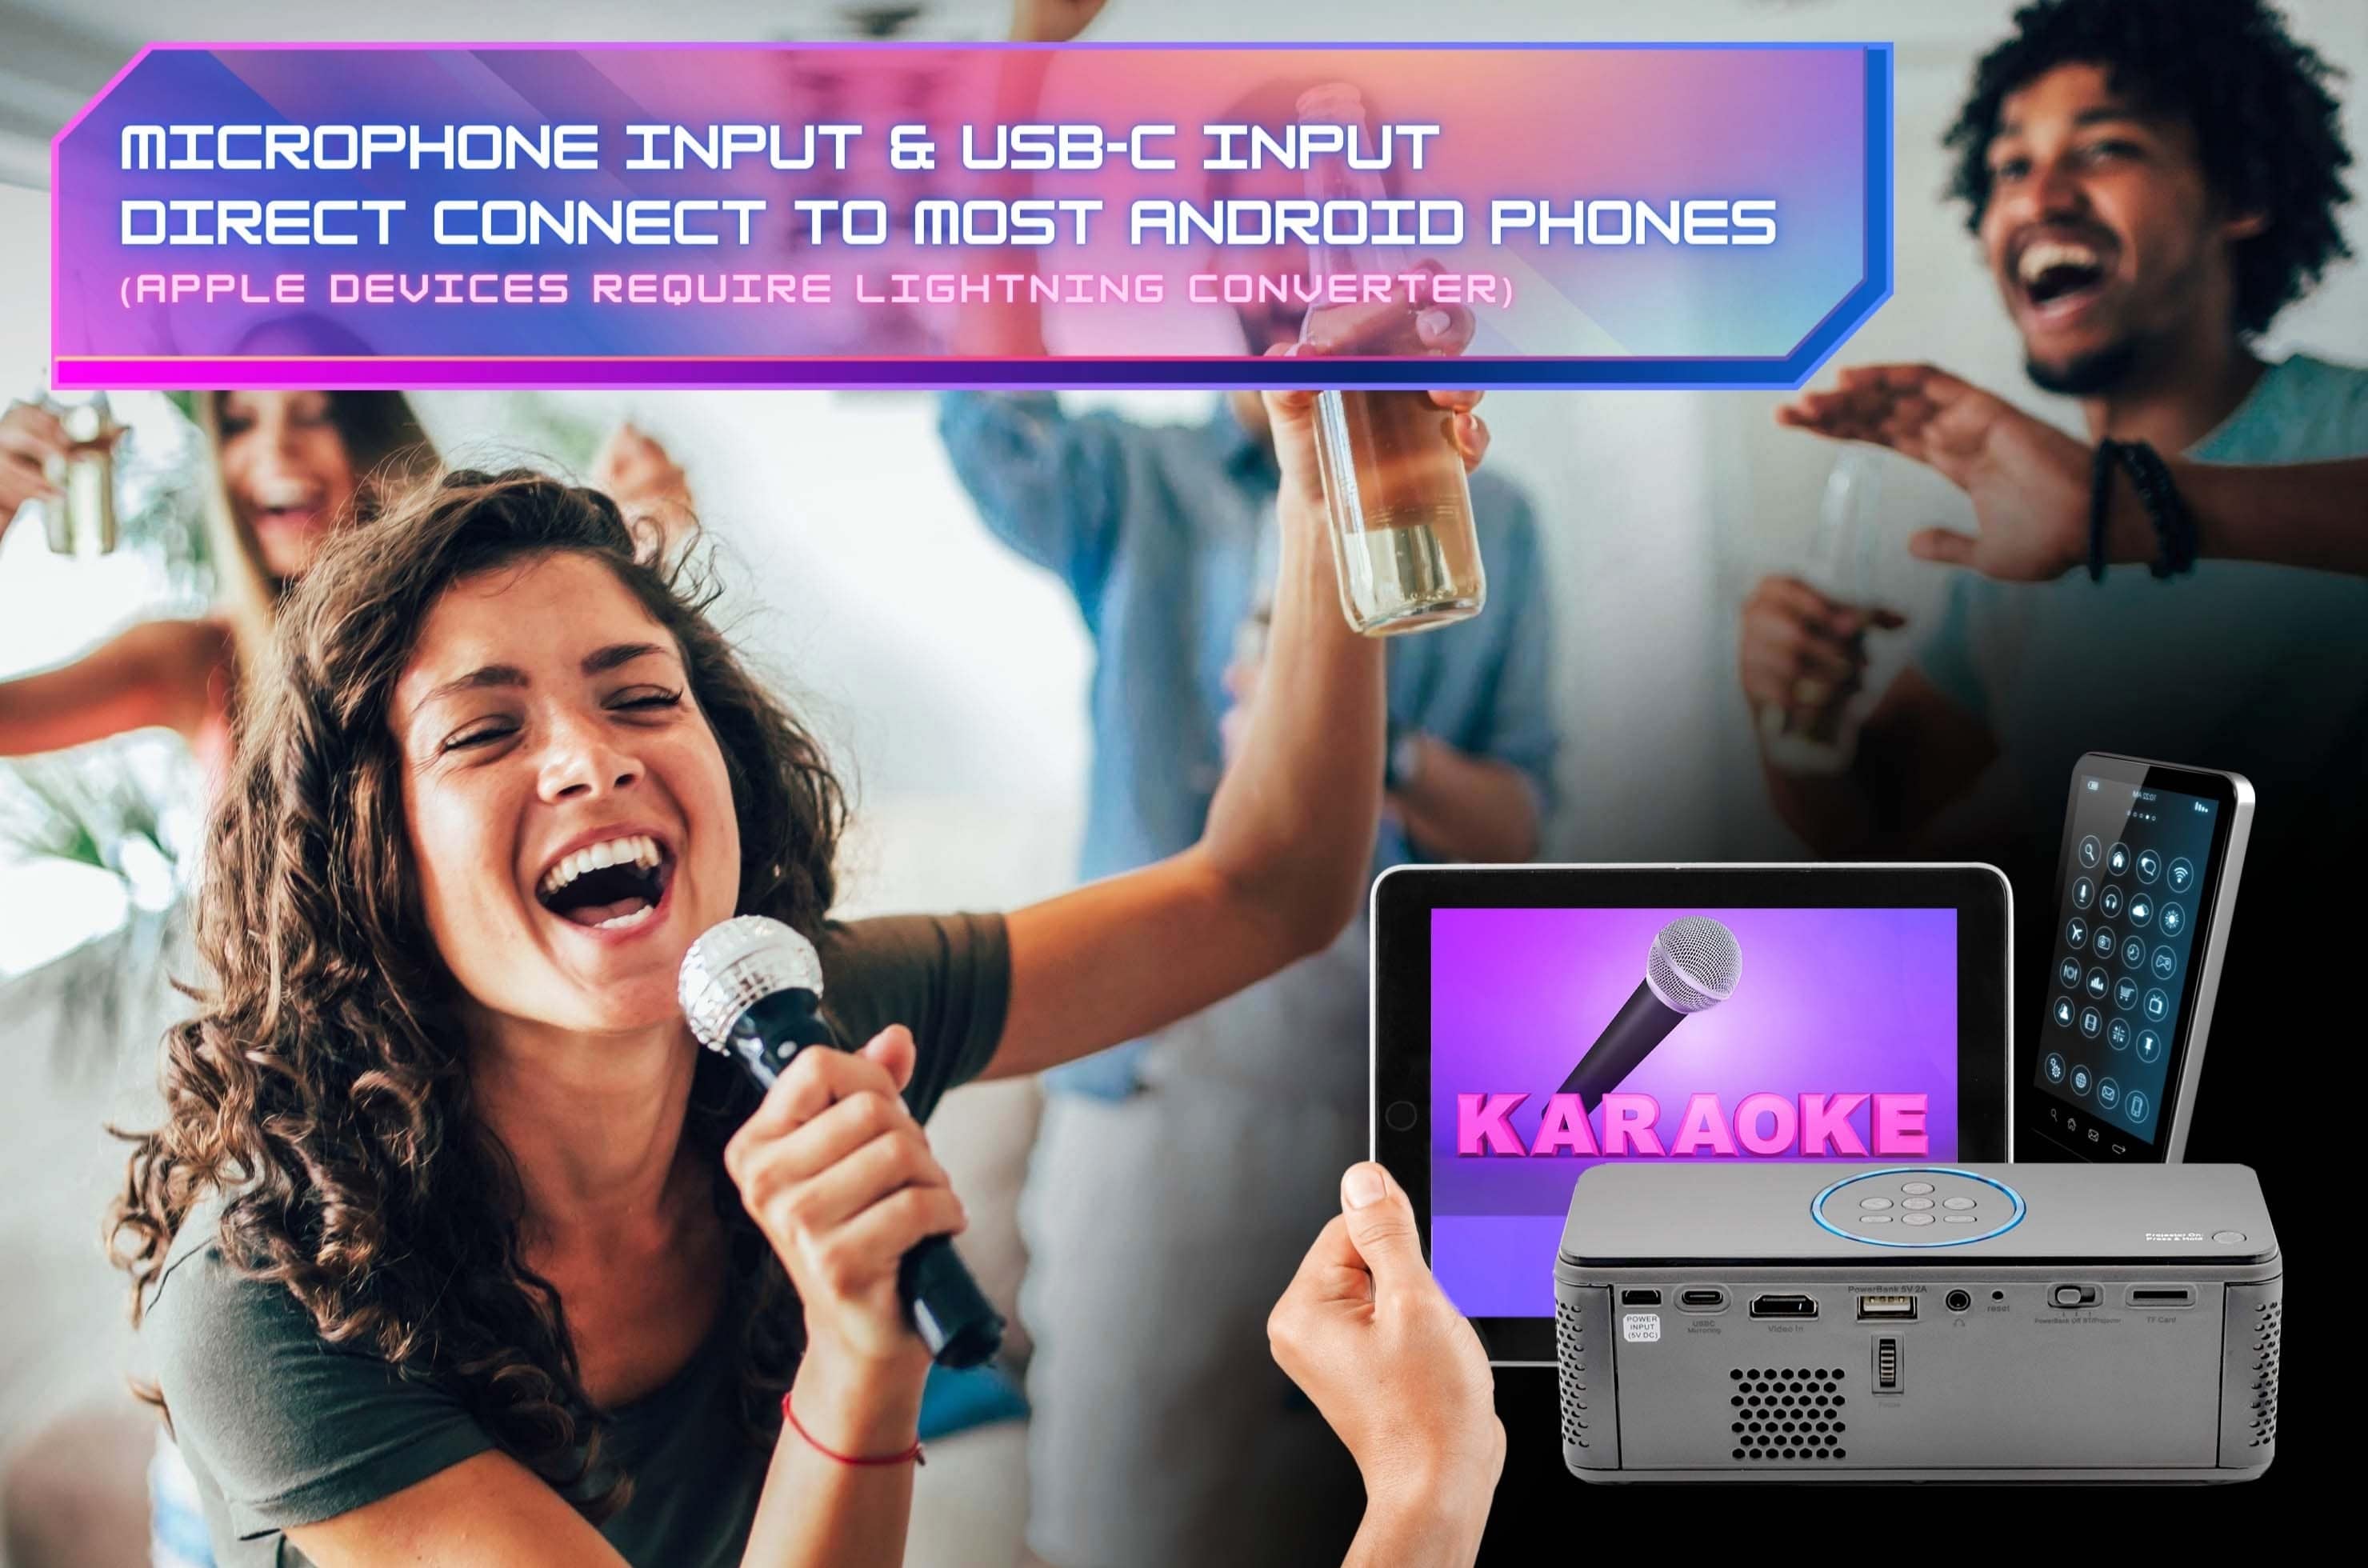 AAXA's BP1K Portable Karaoke Projector with users holding a microphone and singing having fun.